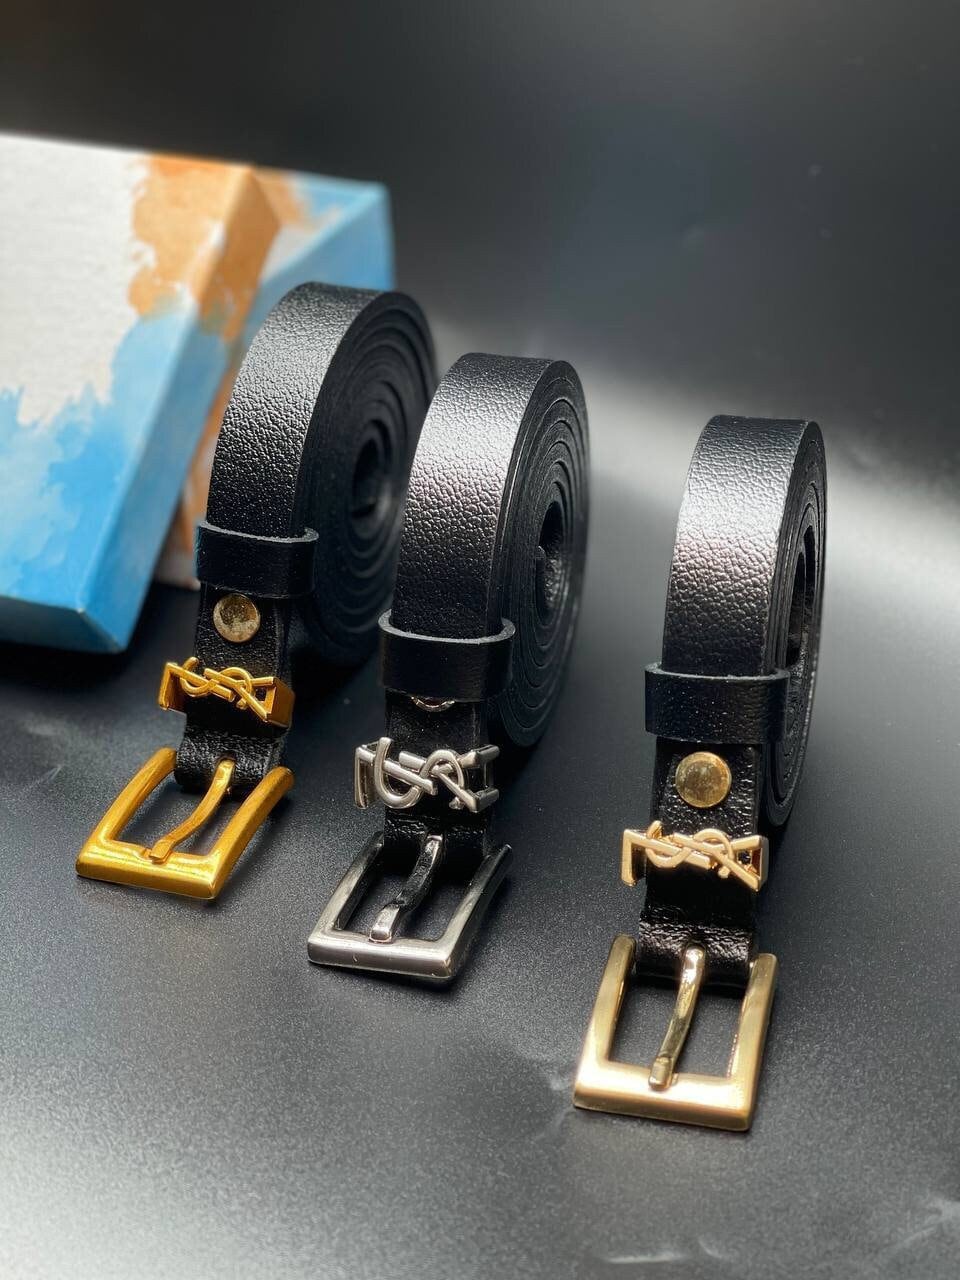 The Price of Designer Belts in South Africa